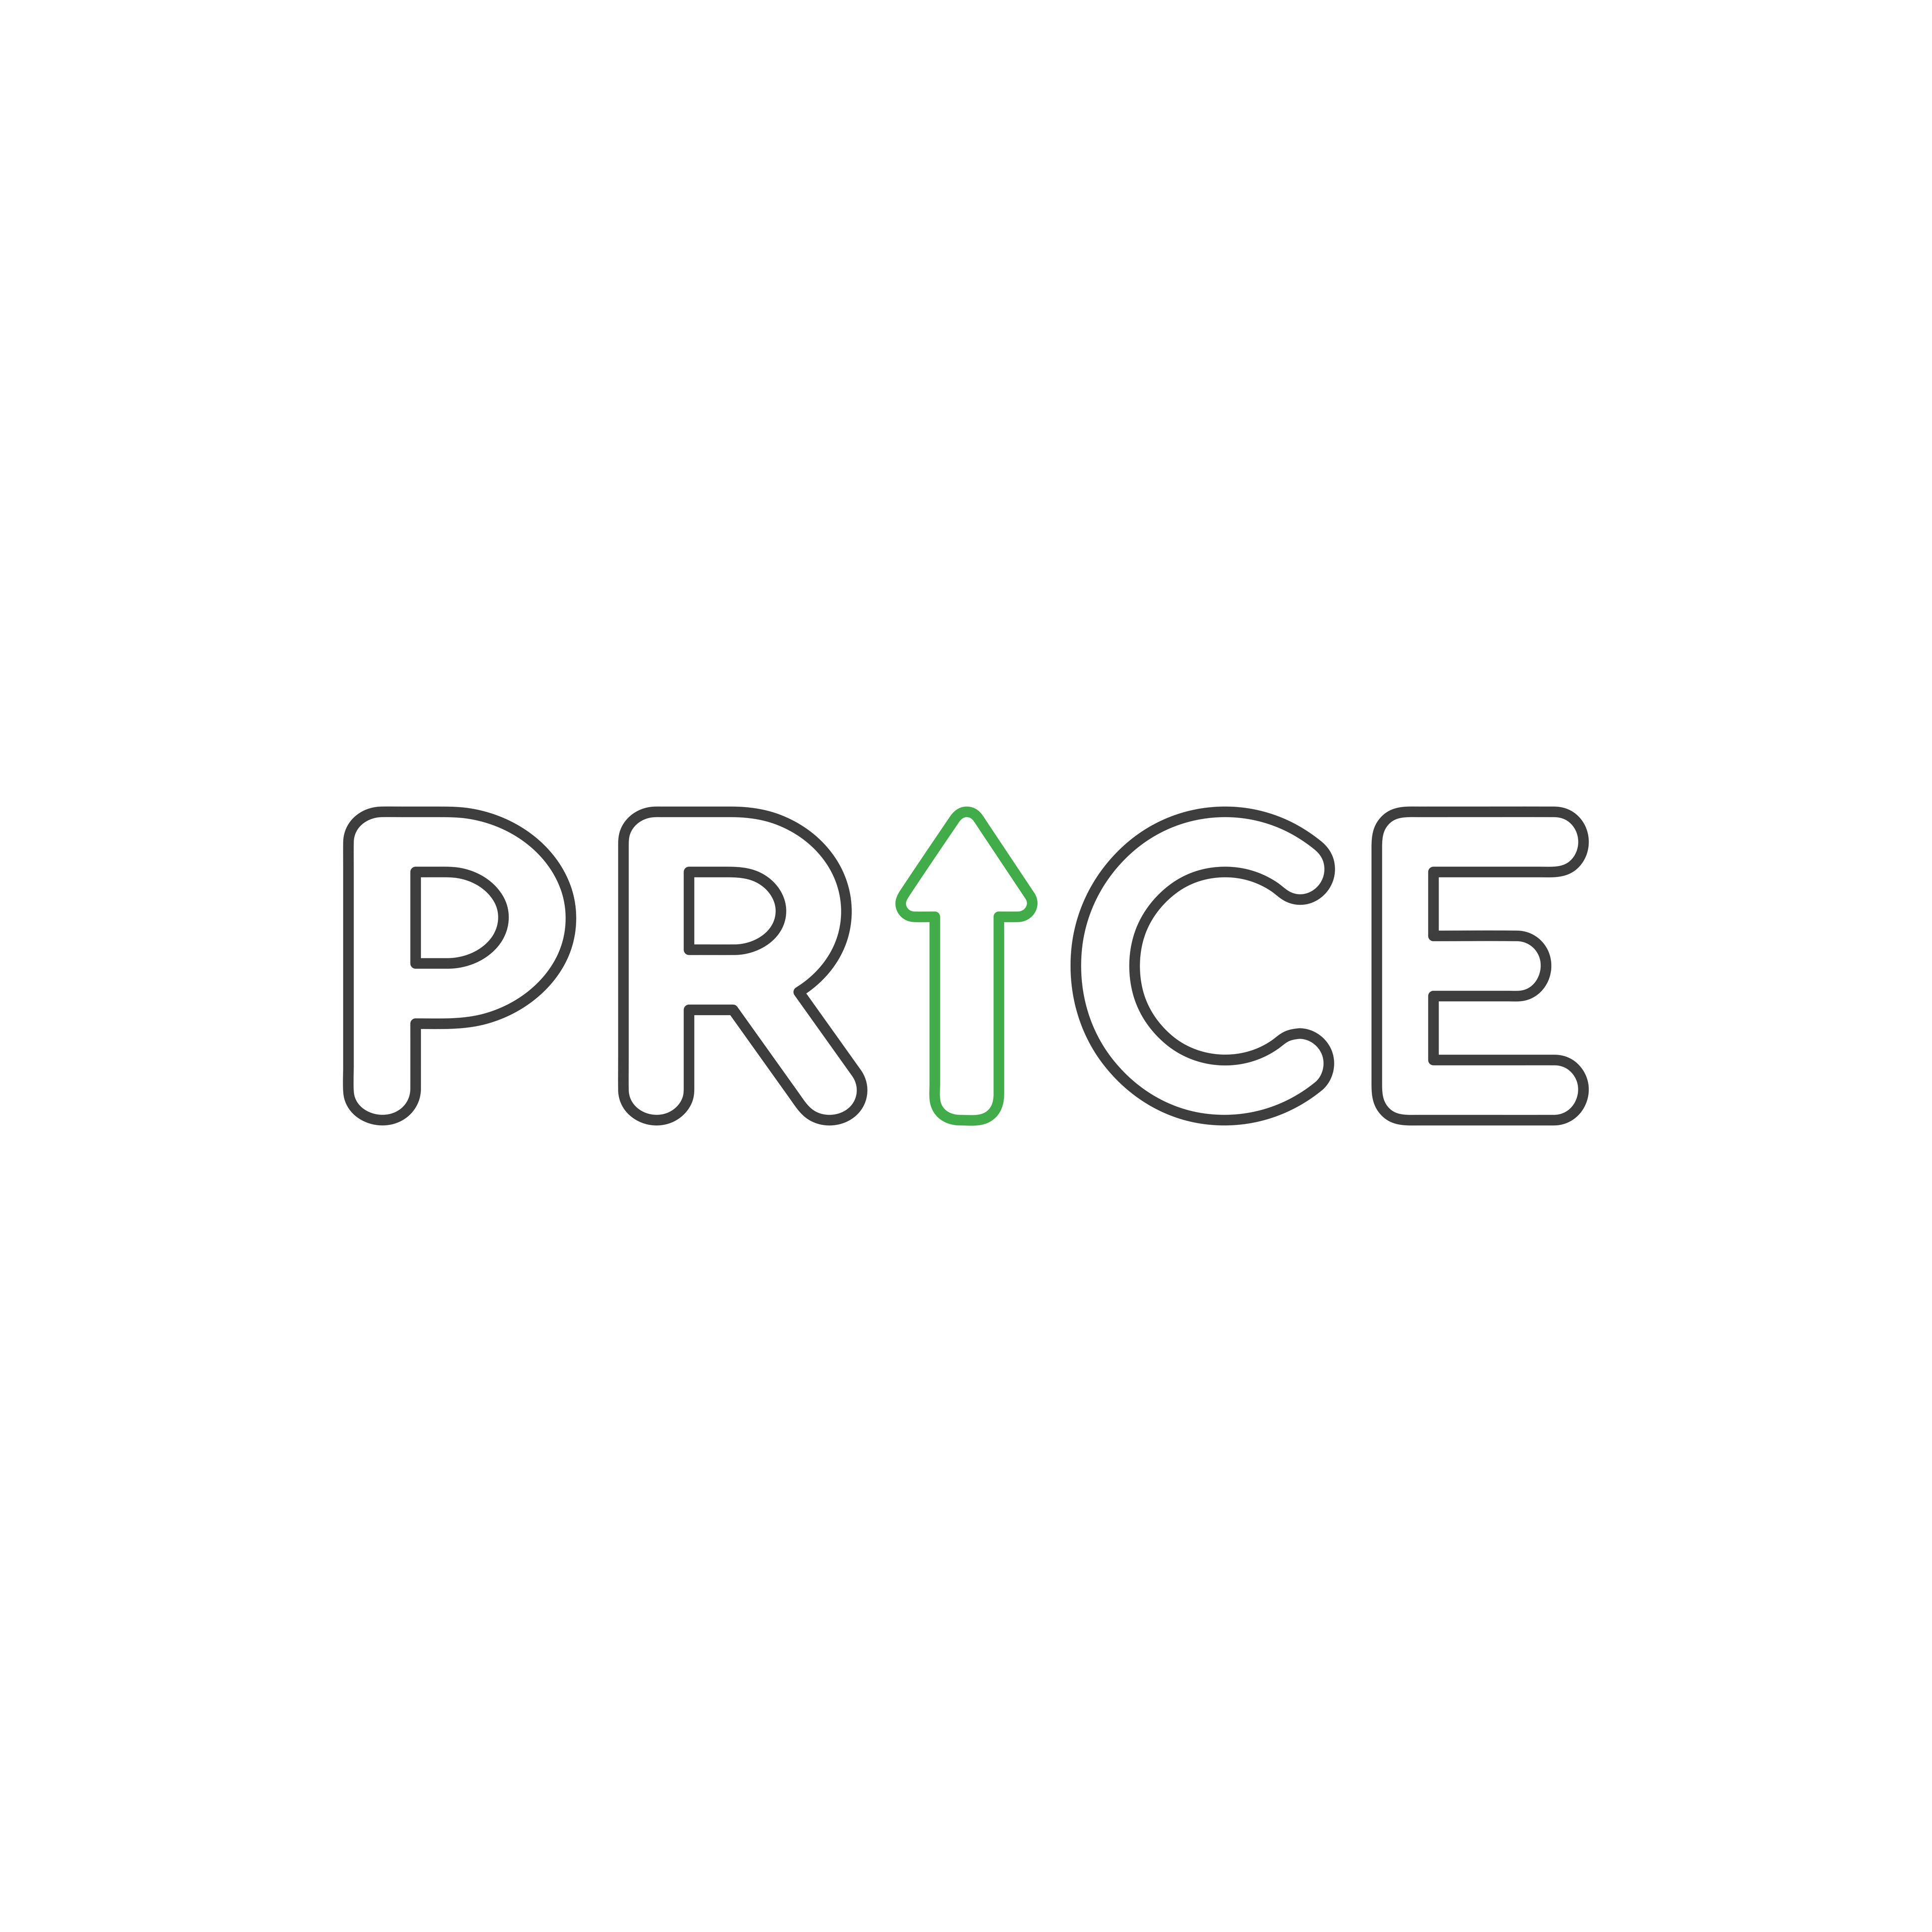 Vector icon concept of price word with green arrow moving up. White background and colored.